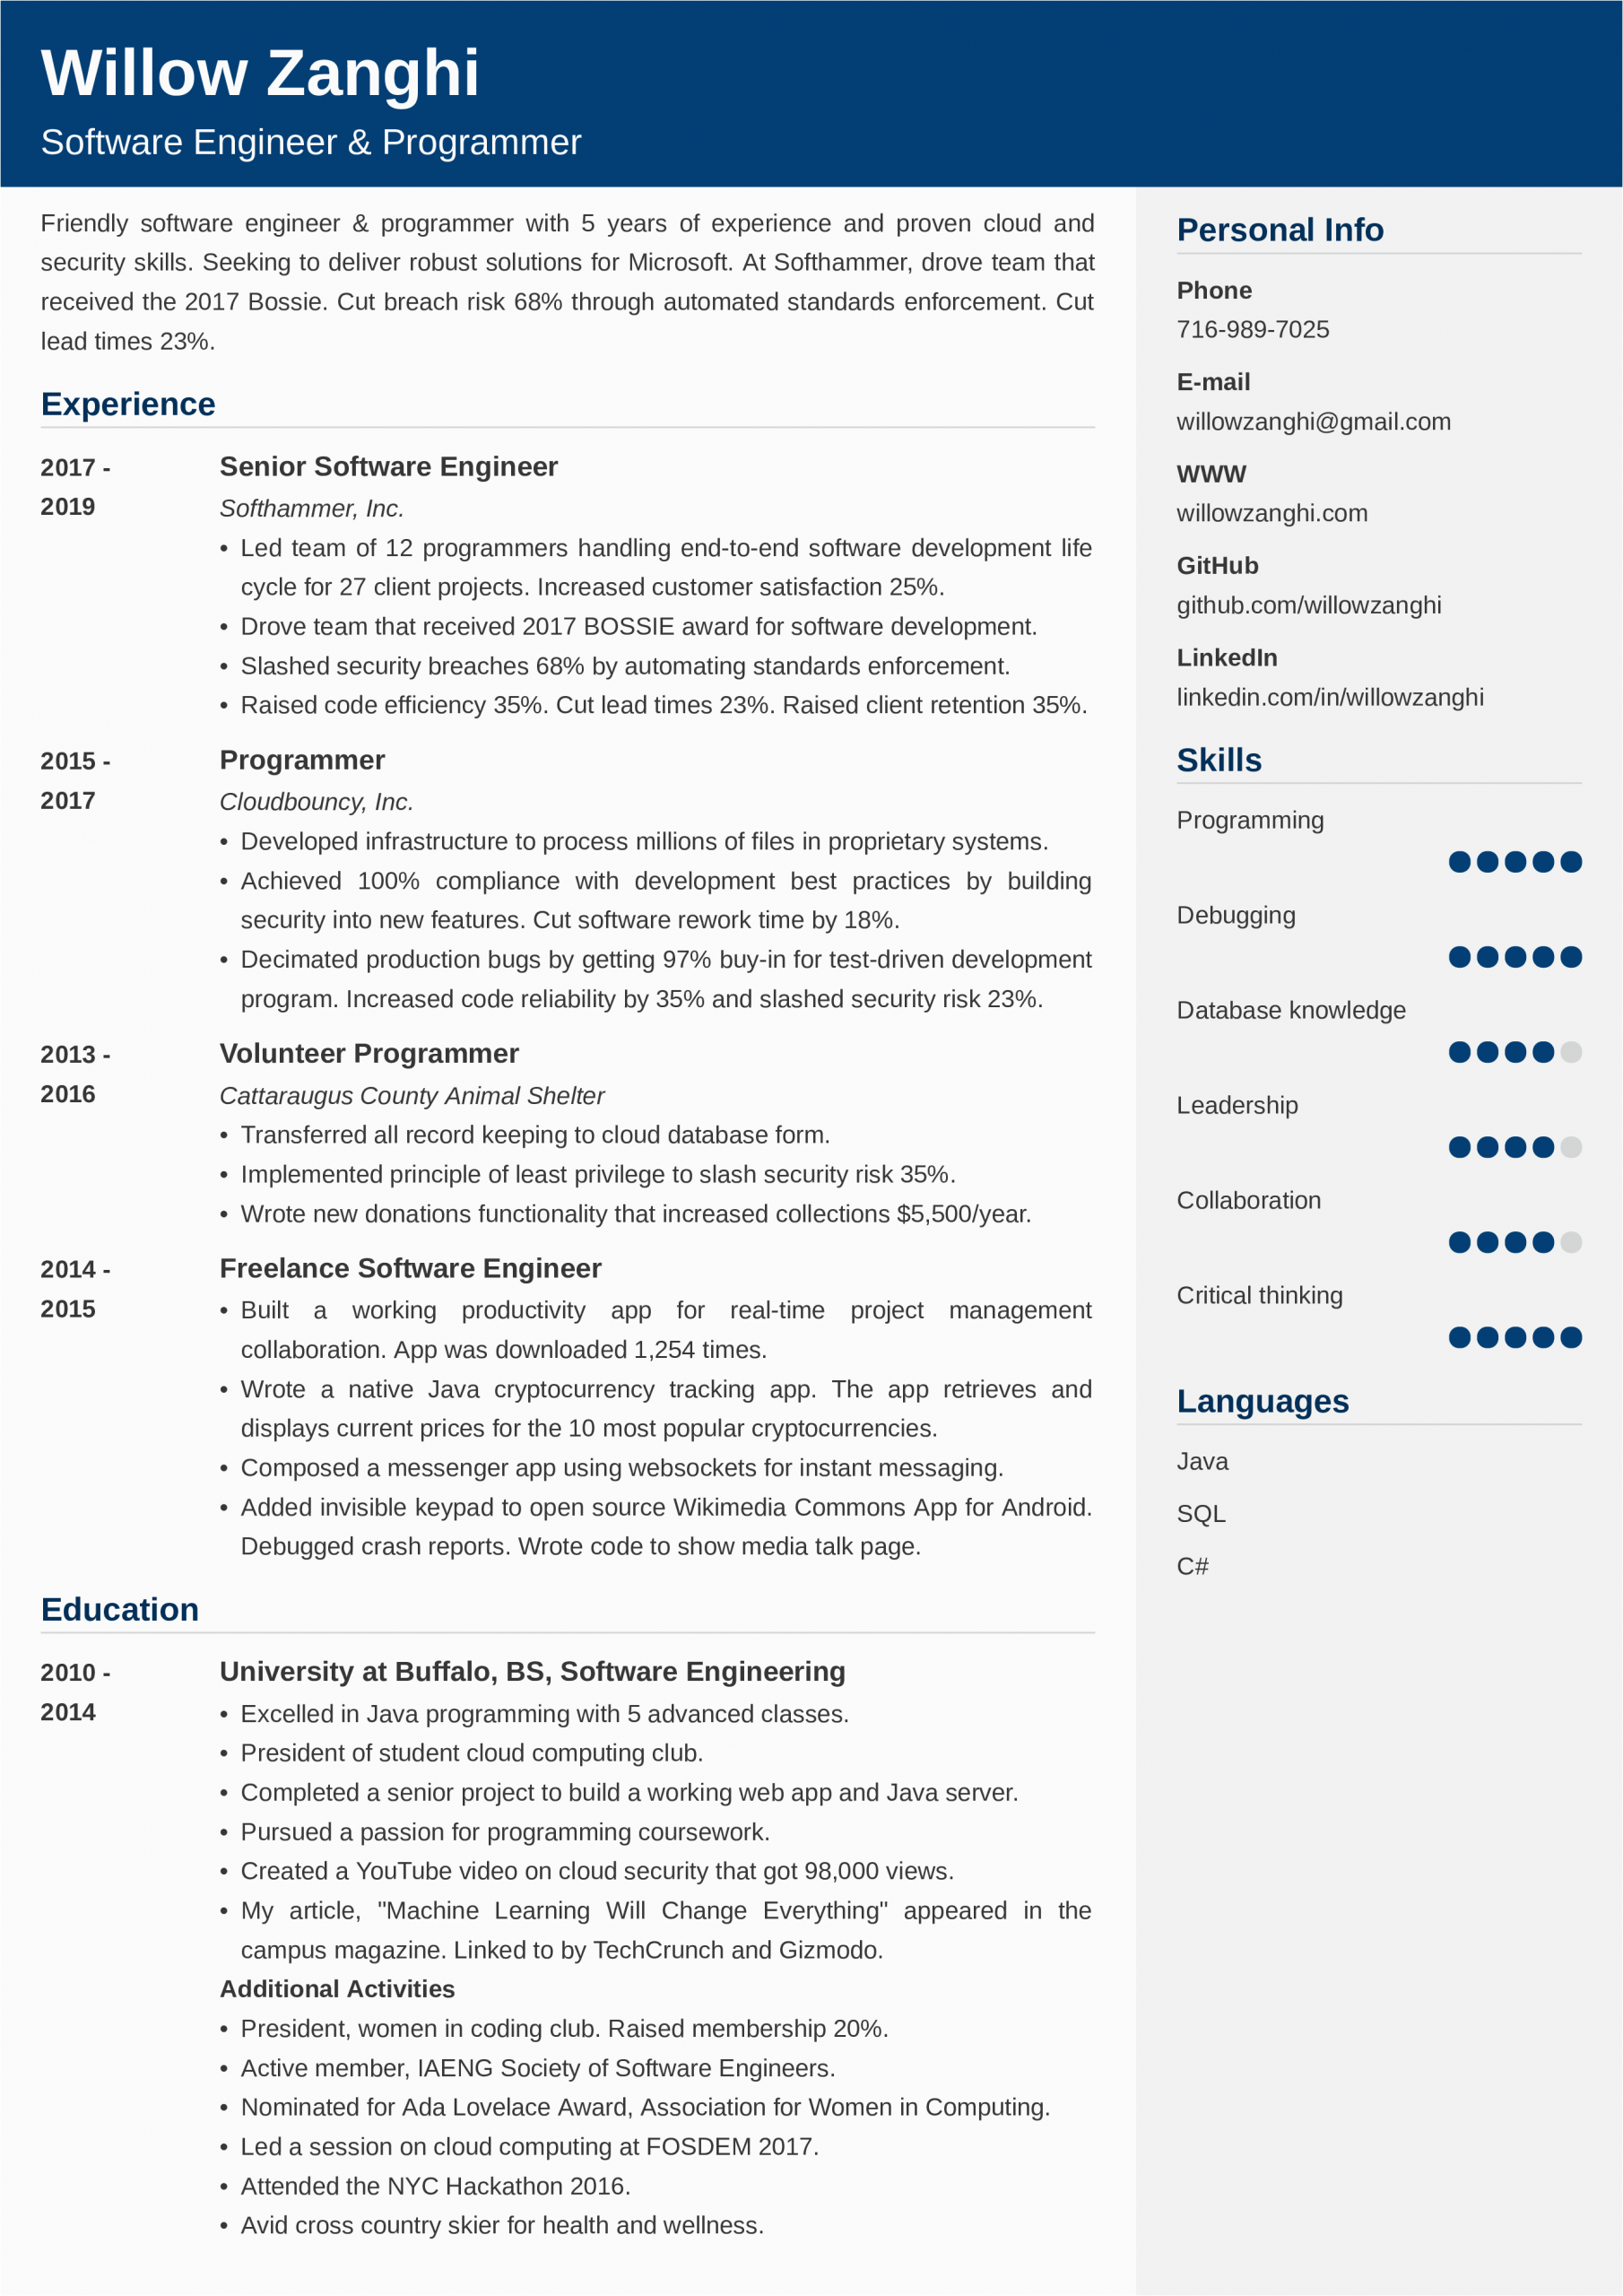 Download Free Resume Templates for software Engineer Engineering Resume Templates